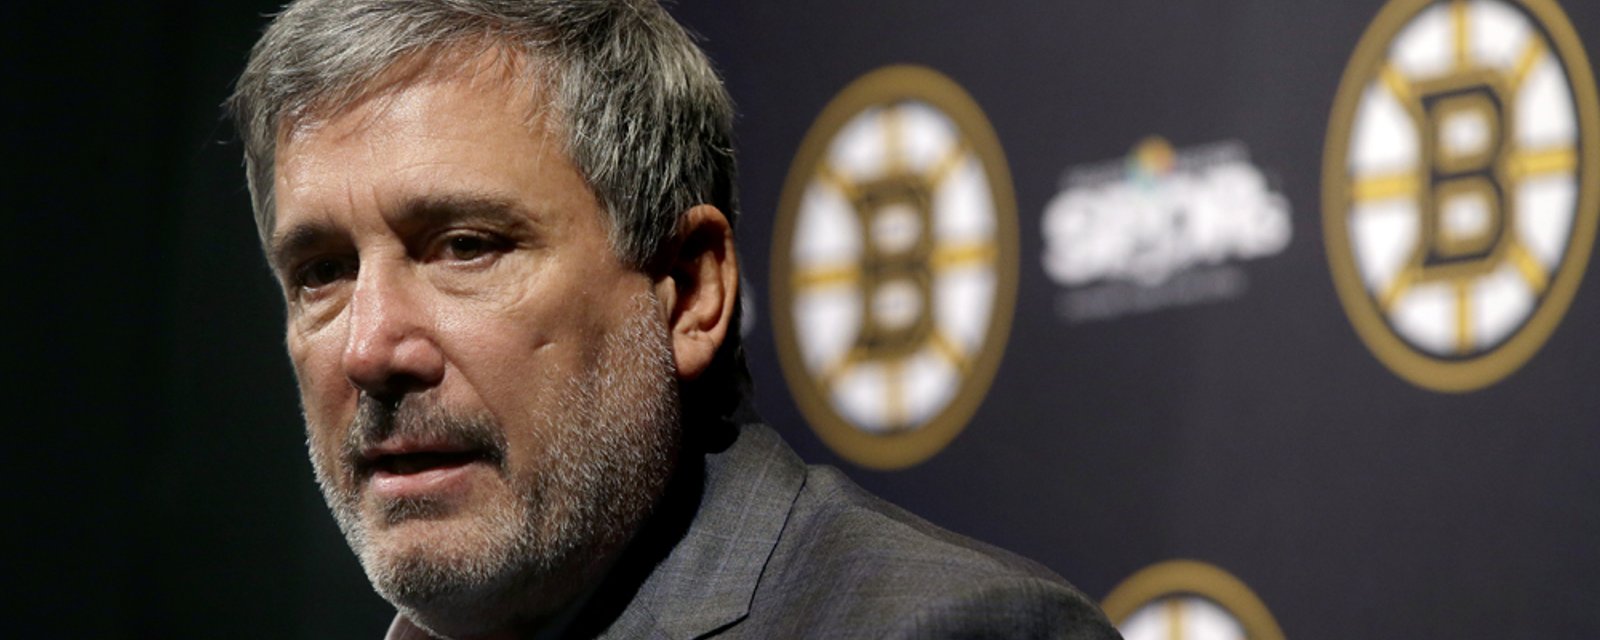 Neely talks about opening facilities in Boston, starting Bruins’ training camp